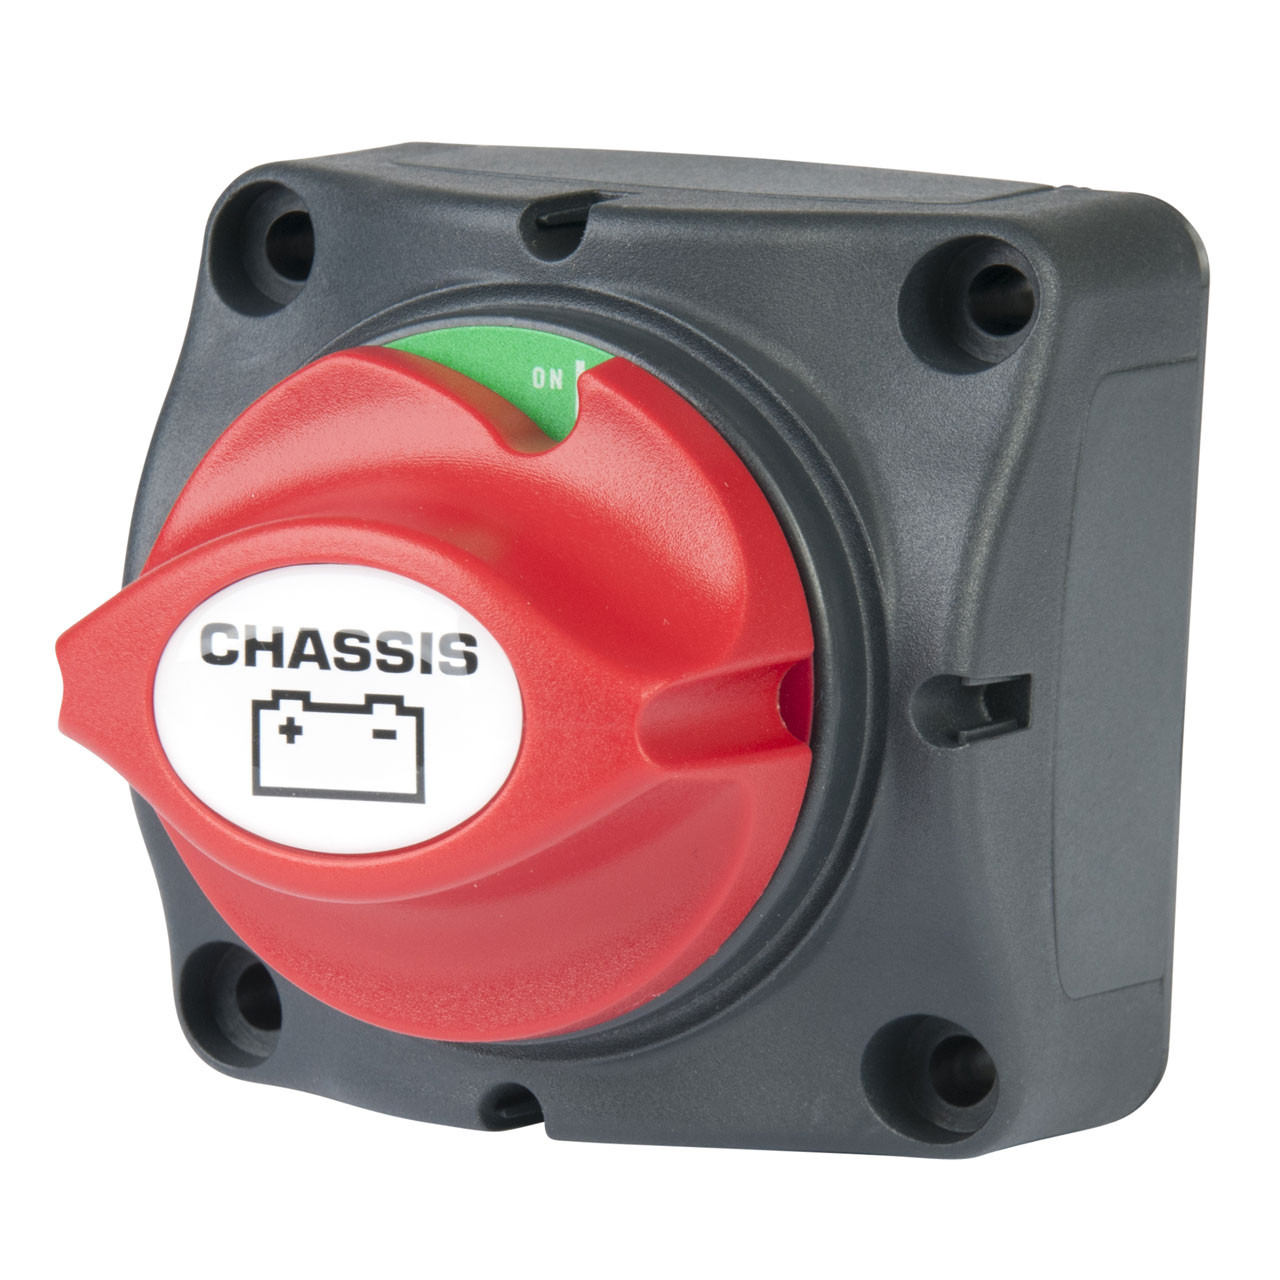 Switching master. Battery Master Switch. Мастер Switch. Contour Battery Switch bep Marine. Master Switch Denio.